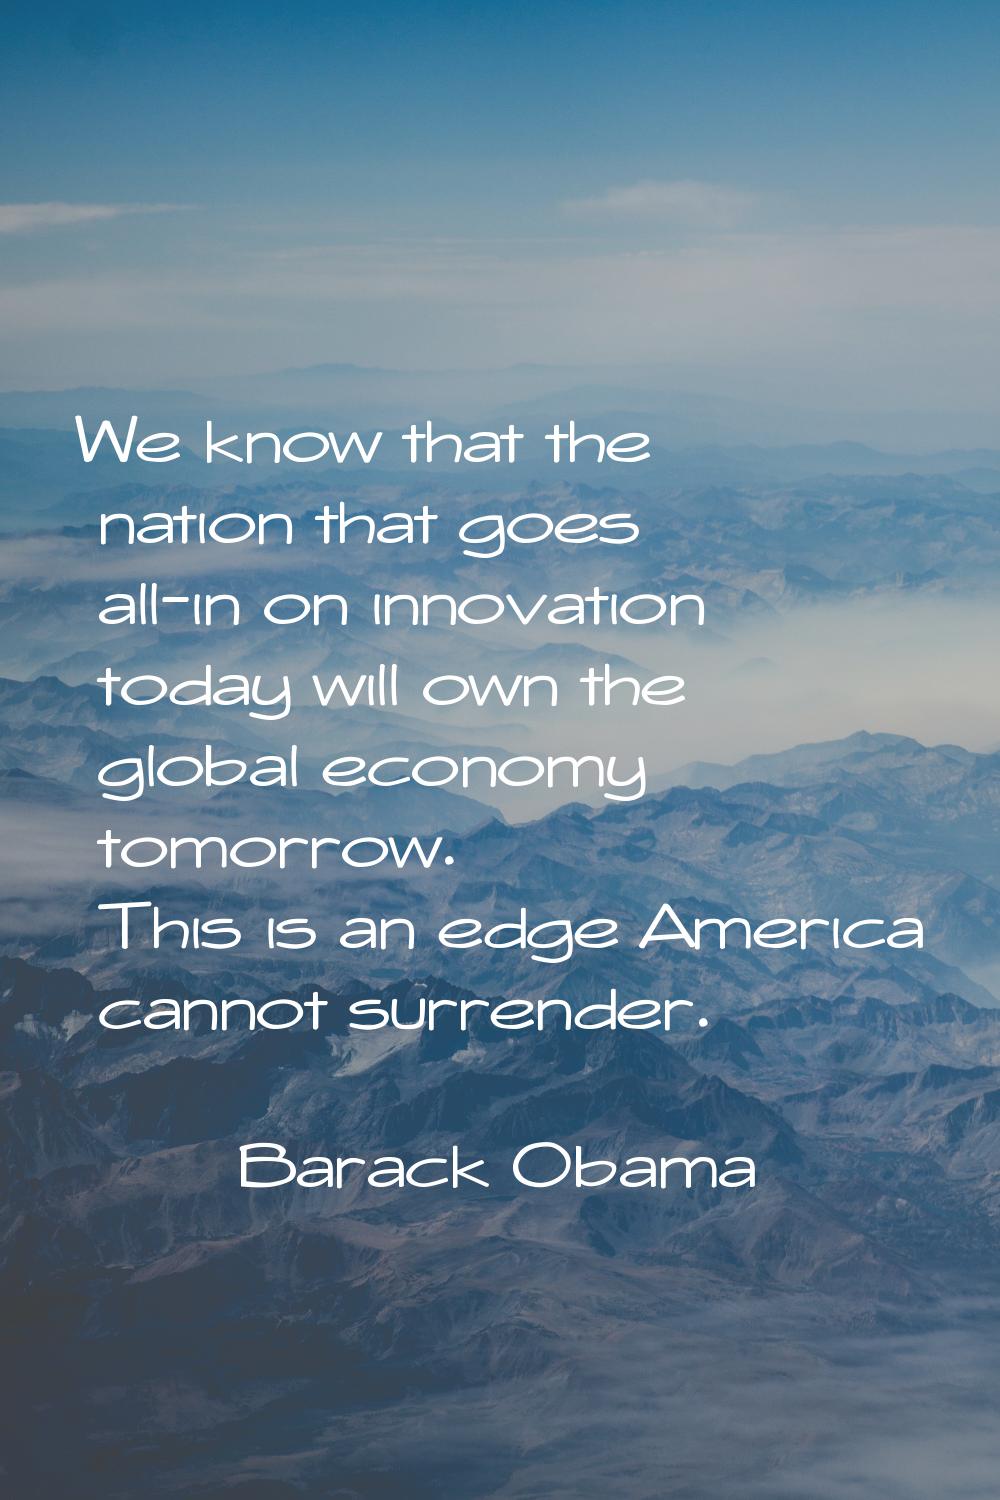 We know that the nation that goes all-in on innovation today will own the global economy tomorrow. 